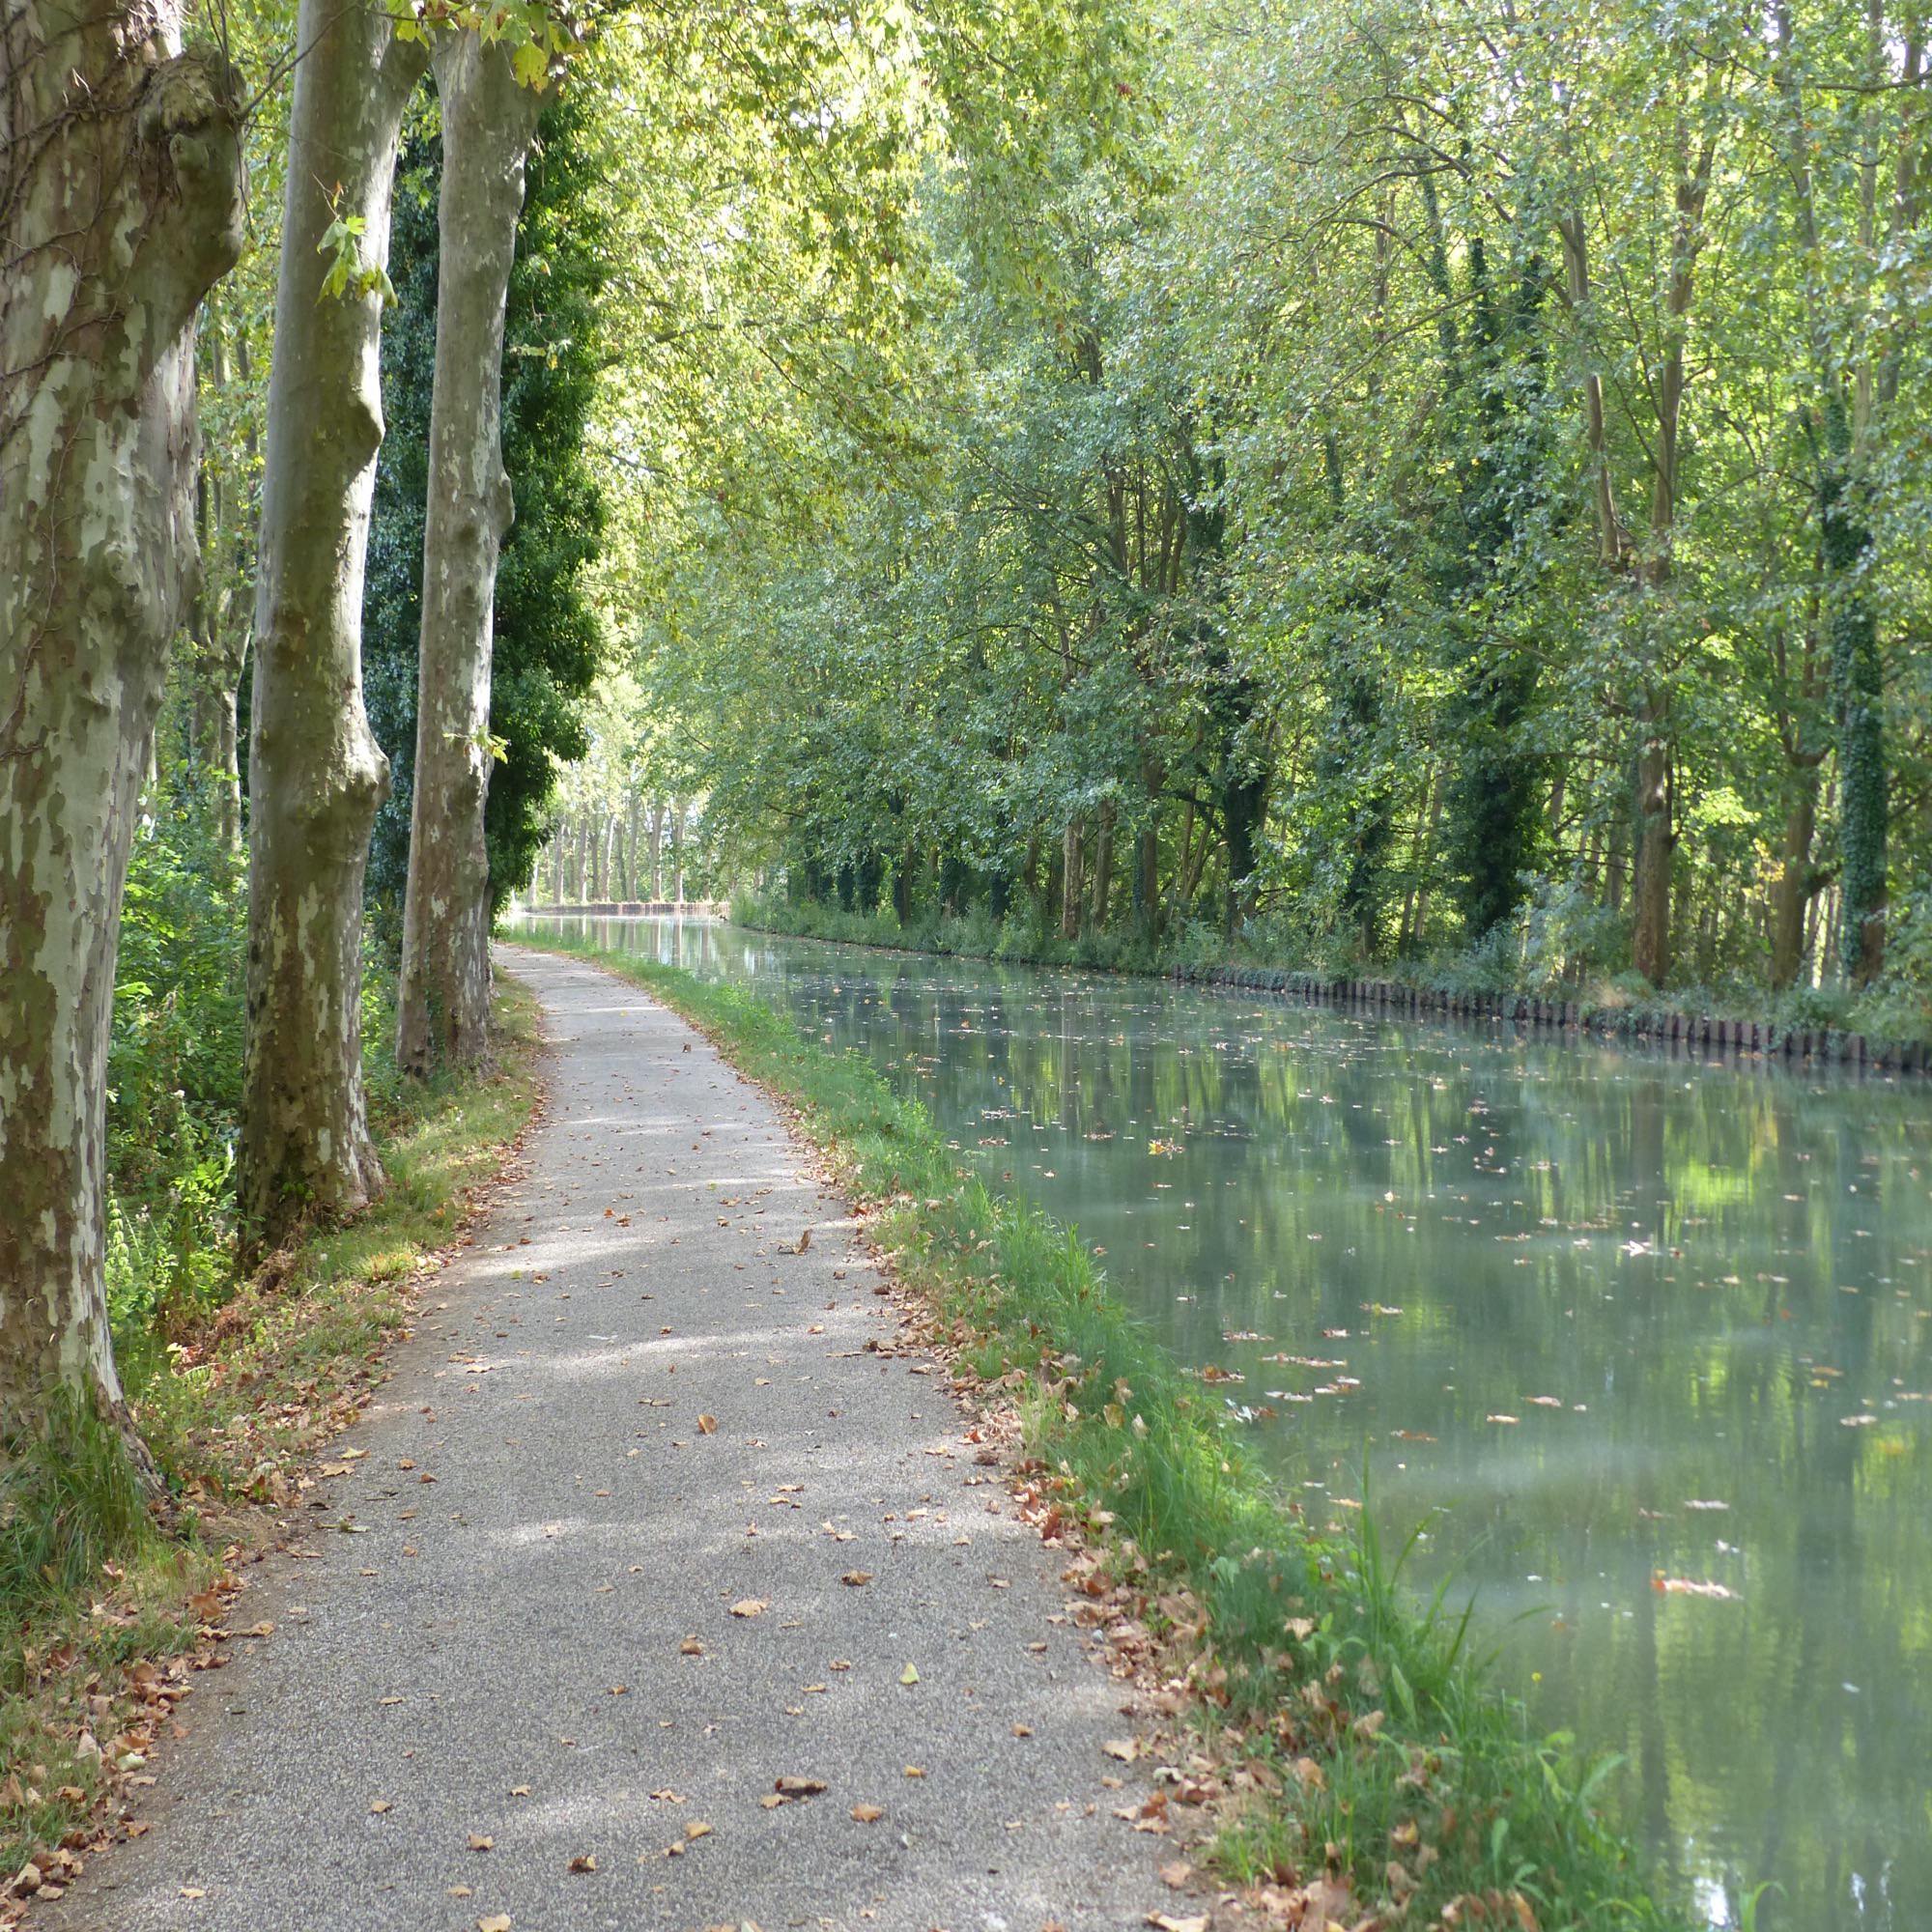 2 The Garonne Canal offers one of the best routes on traffic-free asphalted paths